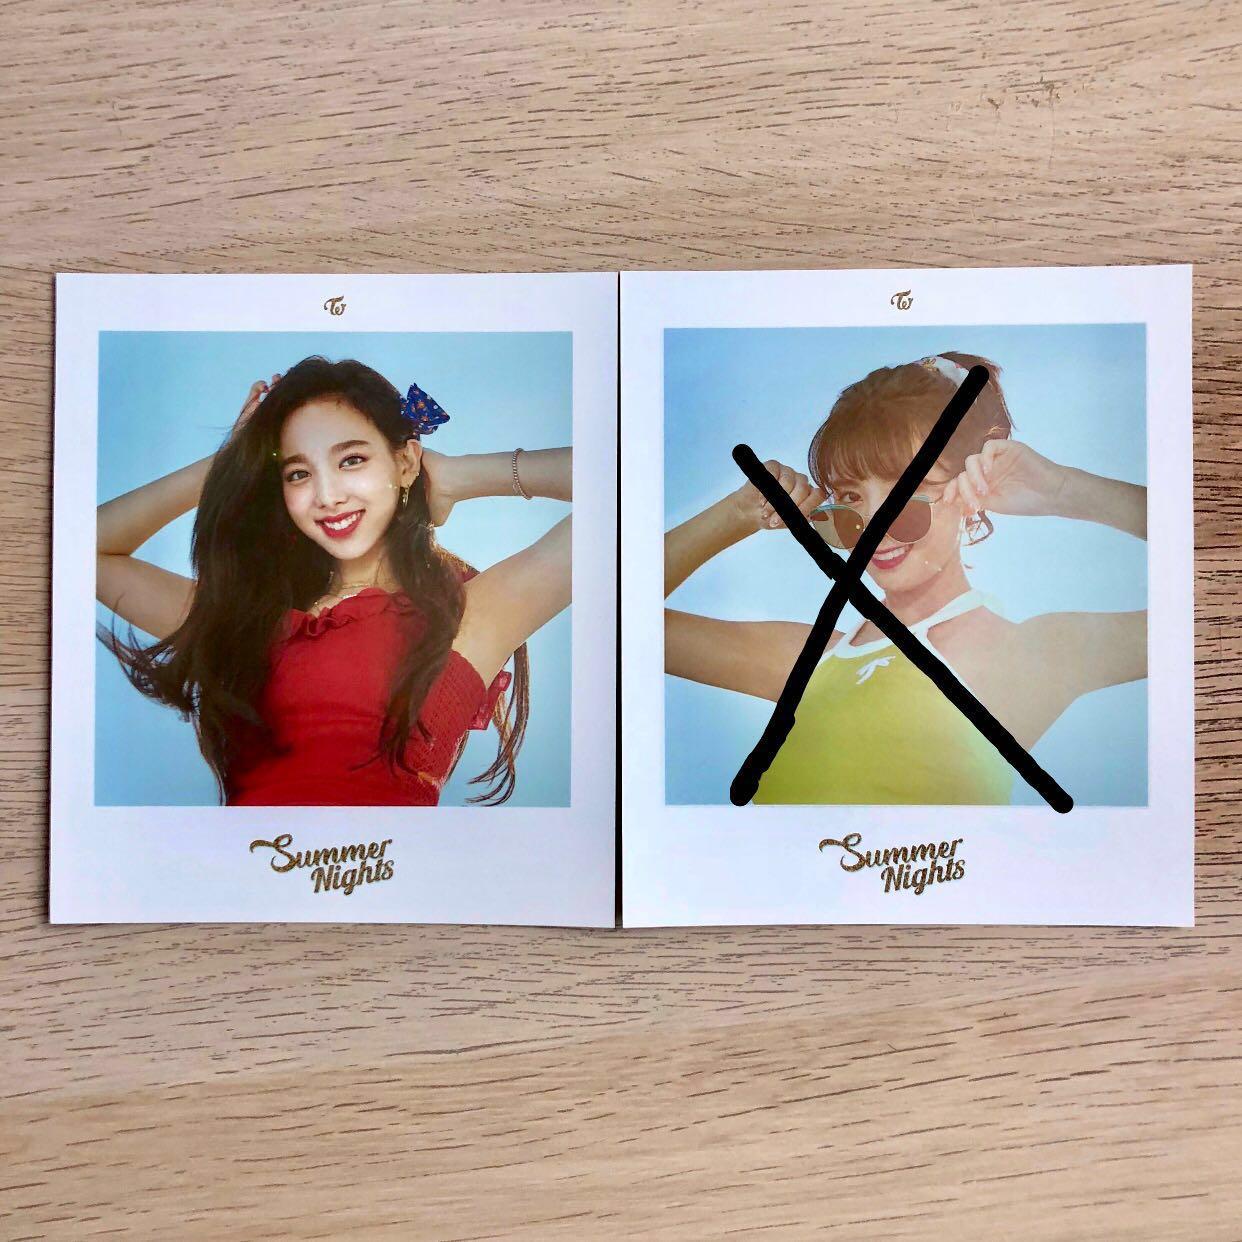 Twice 2nd Special Album Summer Night Momo C Photo Card official 